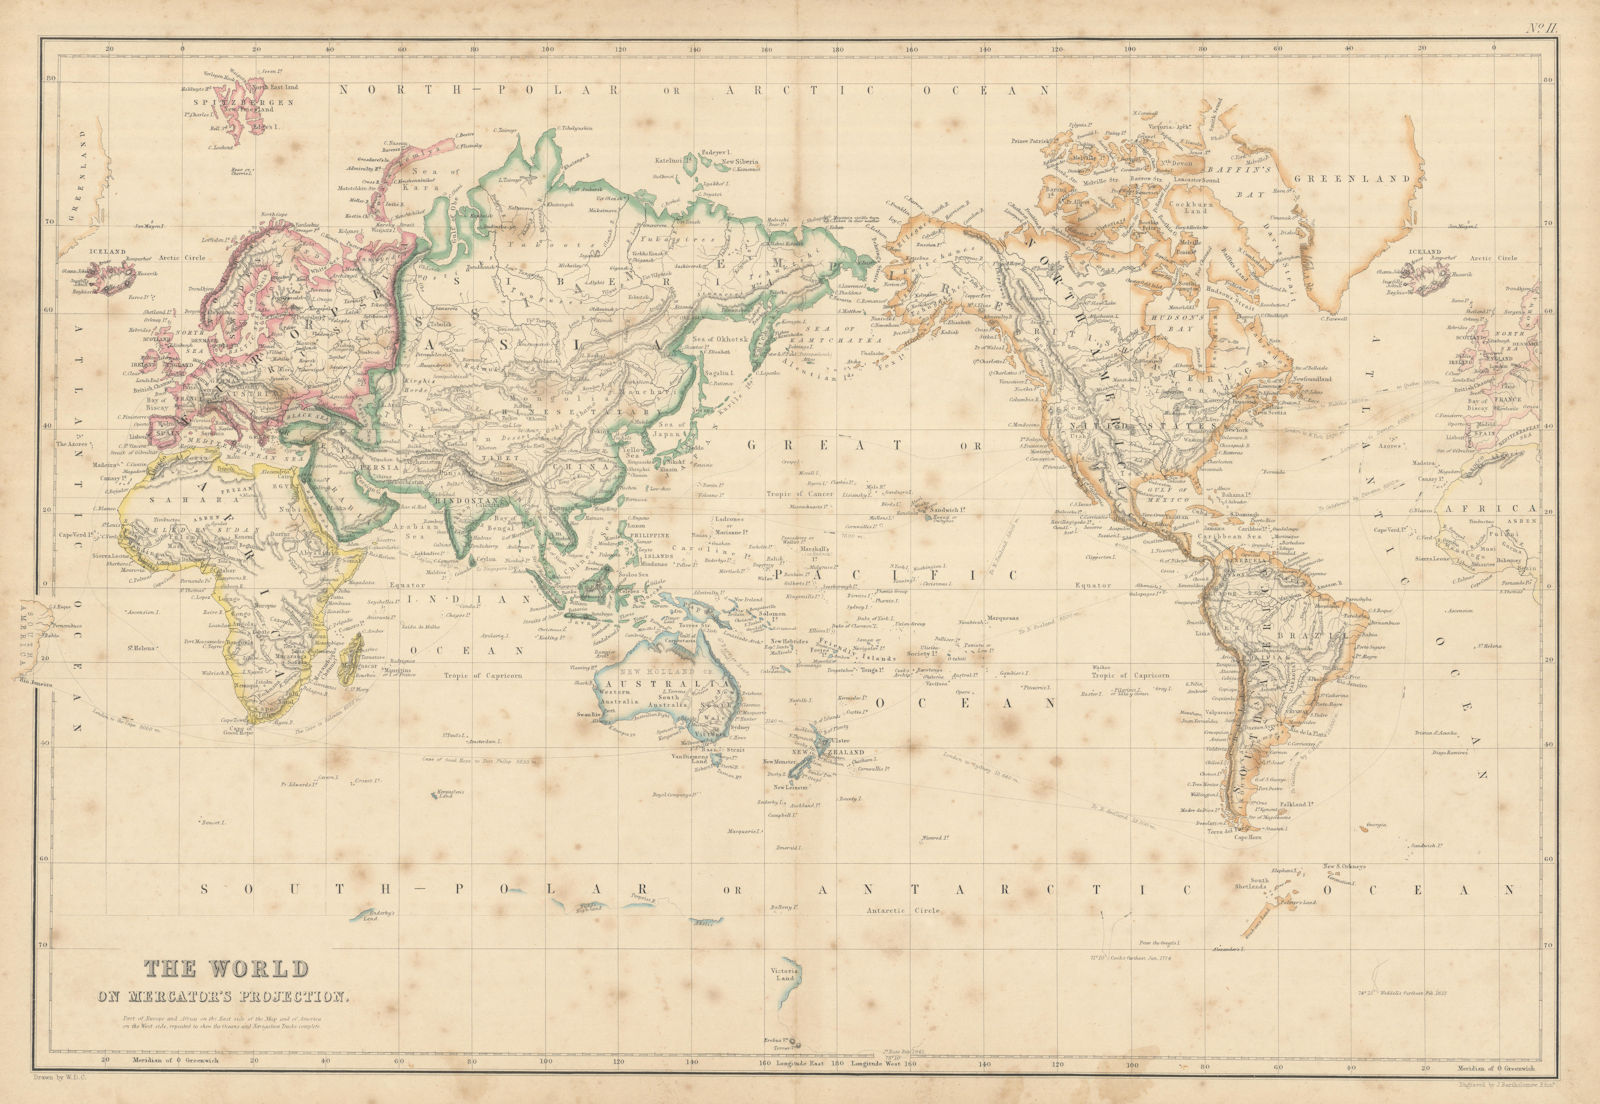 Associate Product The World on Mercator's Projection by John Bartholomew 1860 old antique map